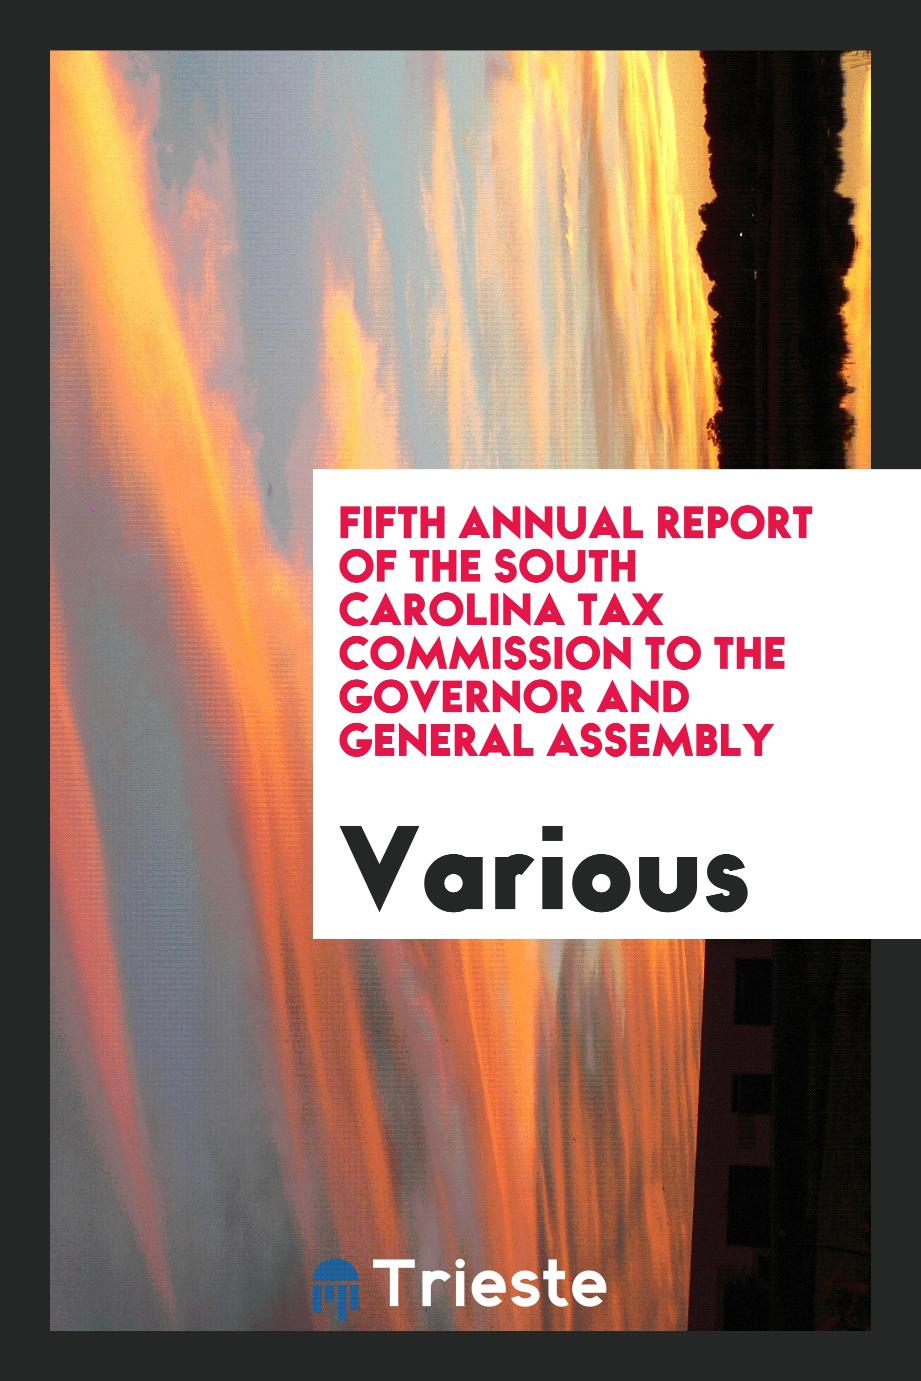 Fifth Annual Report of the South Carolina Tax Commission to the Governor and General Assembly